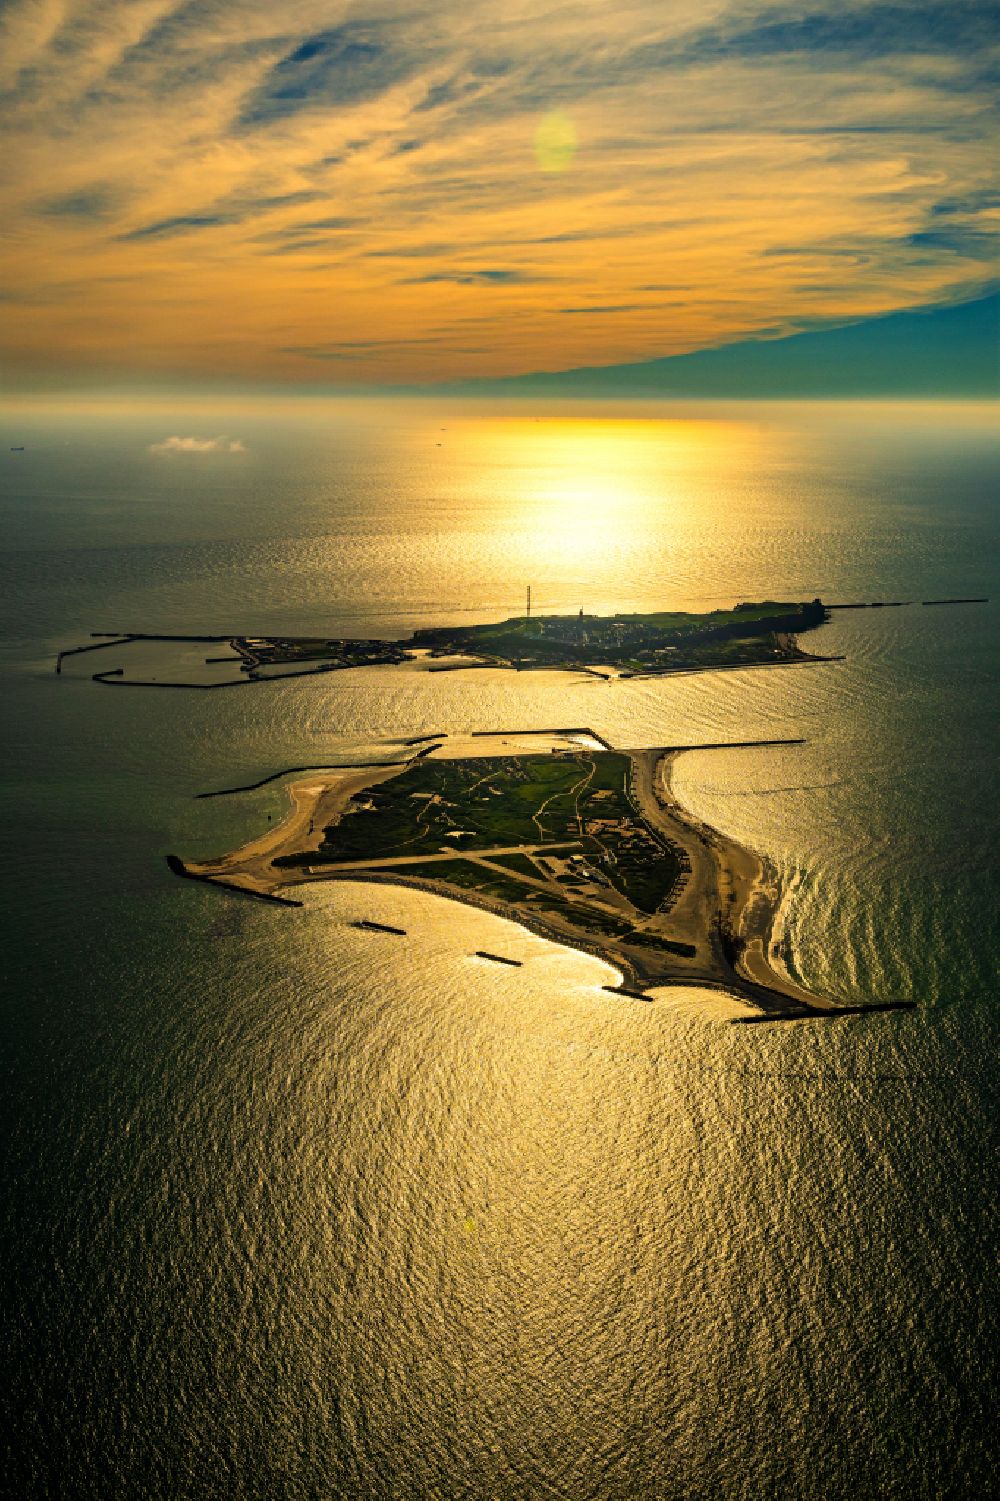 Helgoland from above - Coastal area of the North Sea - Island Helgoland-Duehne in Helgoland in the state Schleswig-Holstein